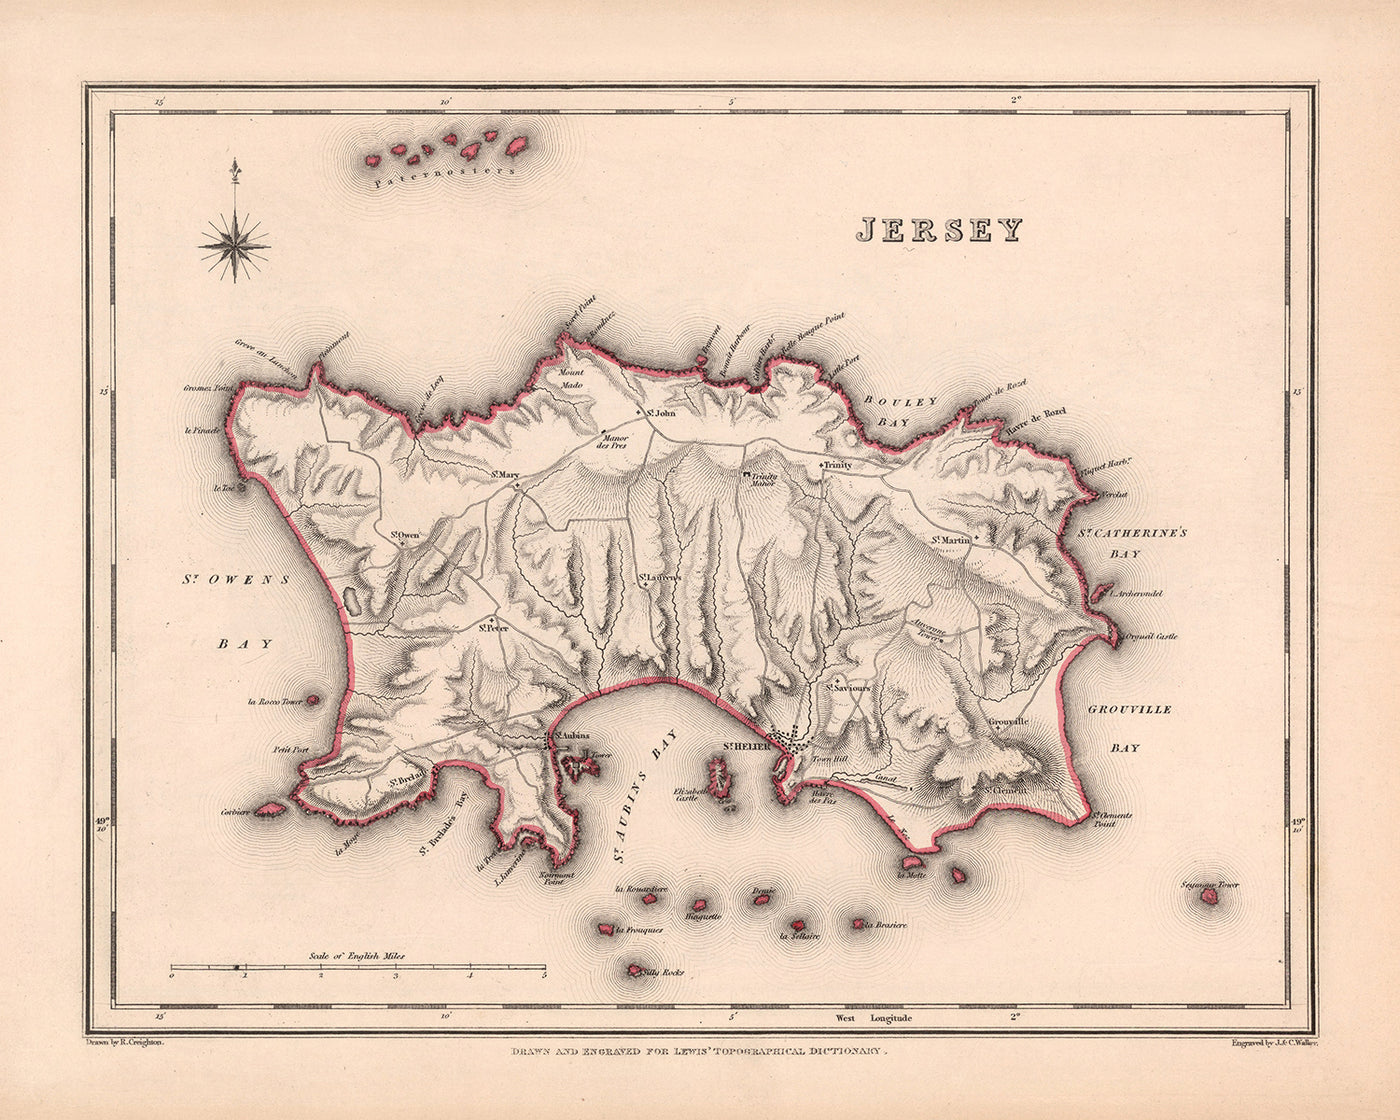 Old Map of Jersey by Samuel Lewis, 1844: St. Helier, St. Brelade, St. Clement, St. John, St. Lawrence